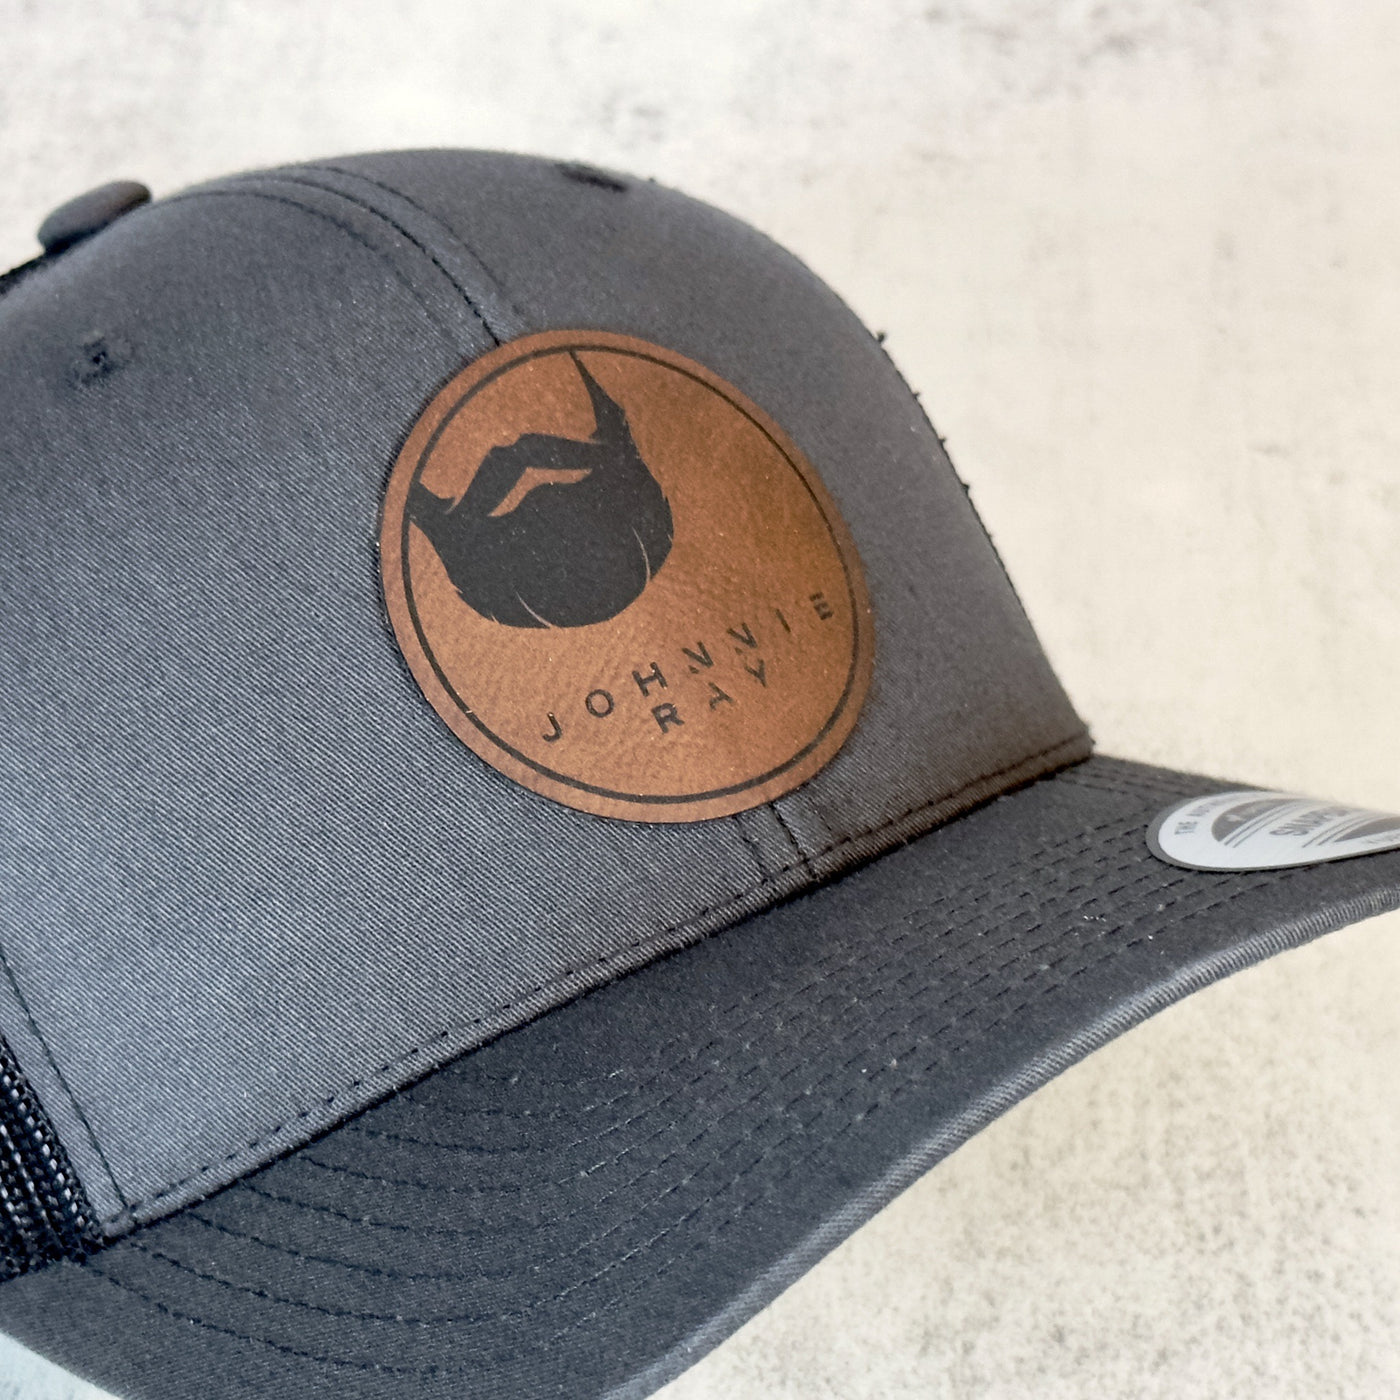 Angled view of Dark Grey Johnnie Ray hat with round brown leather patch with Johnnie Ray logo.